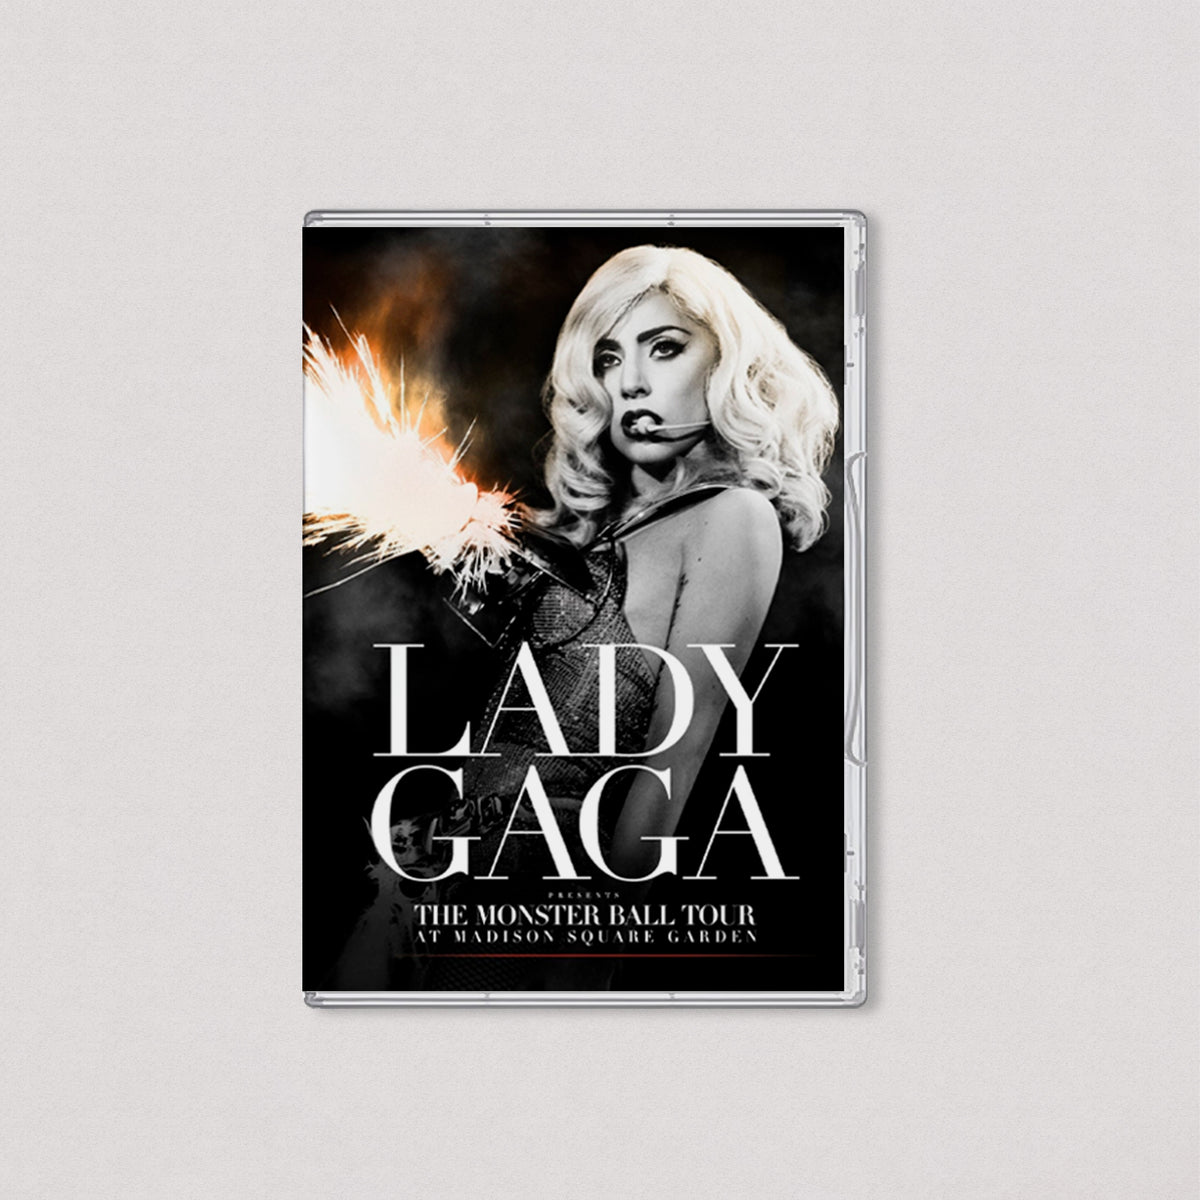 Lady Gaga – The Monster Ball Tour At Madison Square Garden (DVD)